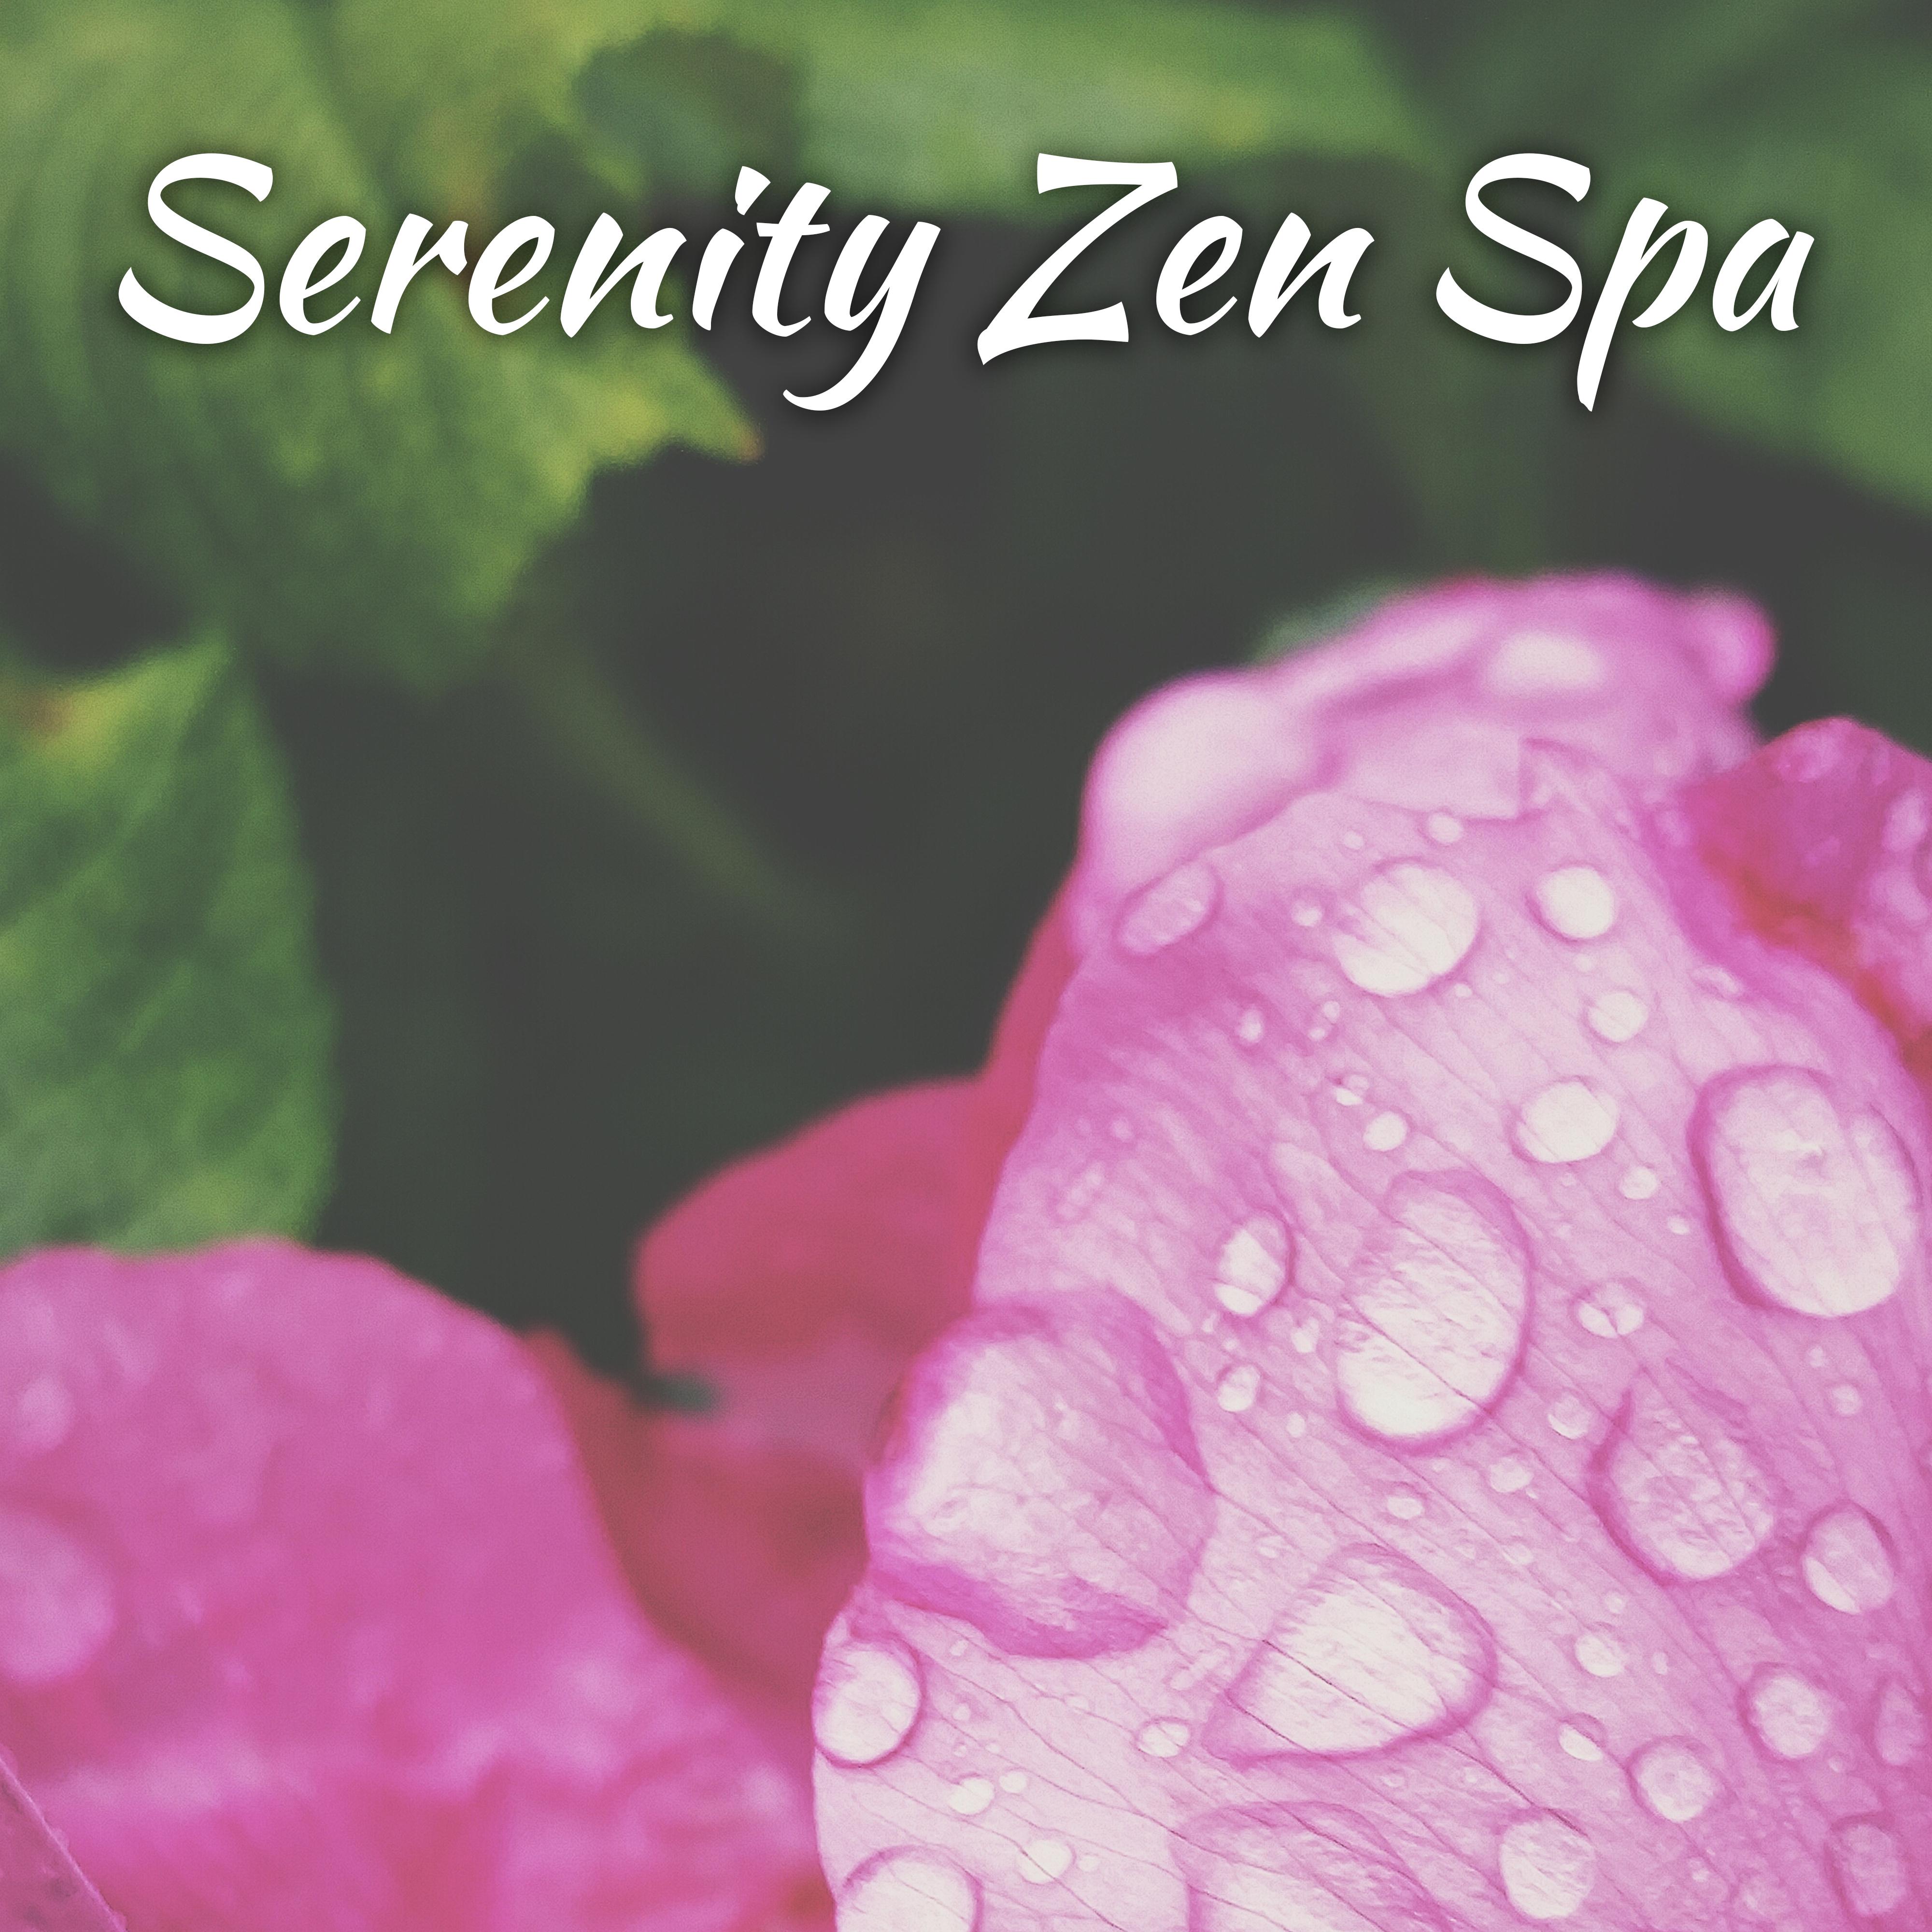 Serenity Zen Spa  Soft Music for Relaxation, Ocean Waves, Nature Sounds to Rest, Ambient Music, Deep Massage, Wellness, Relief